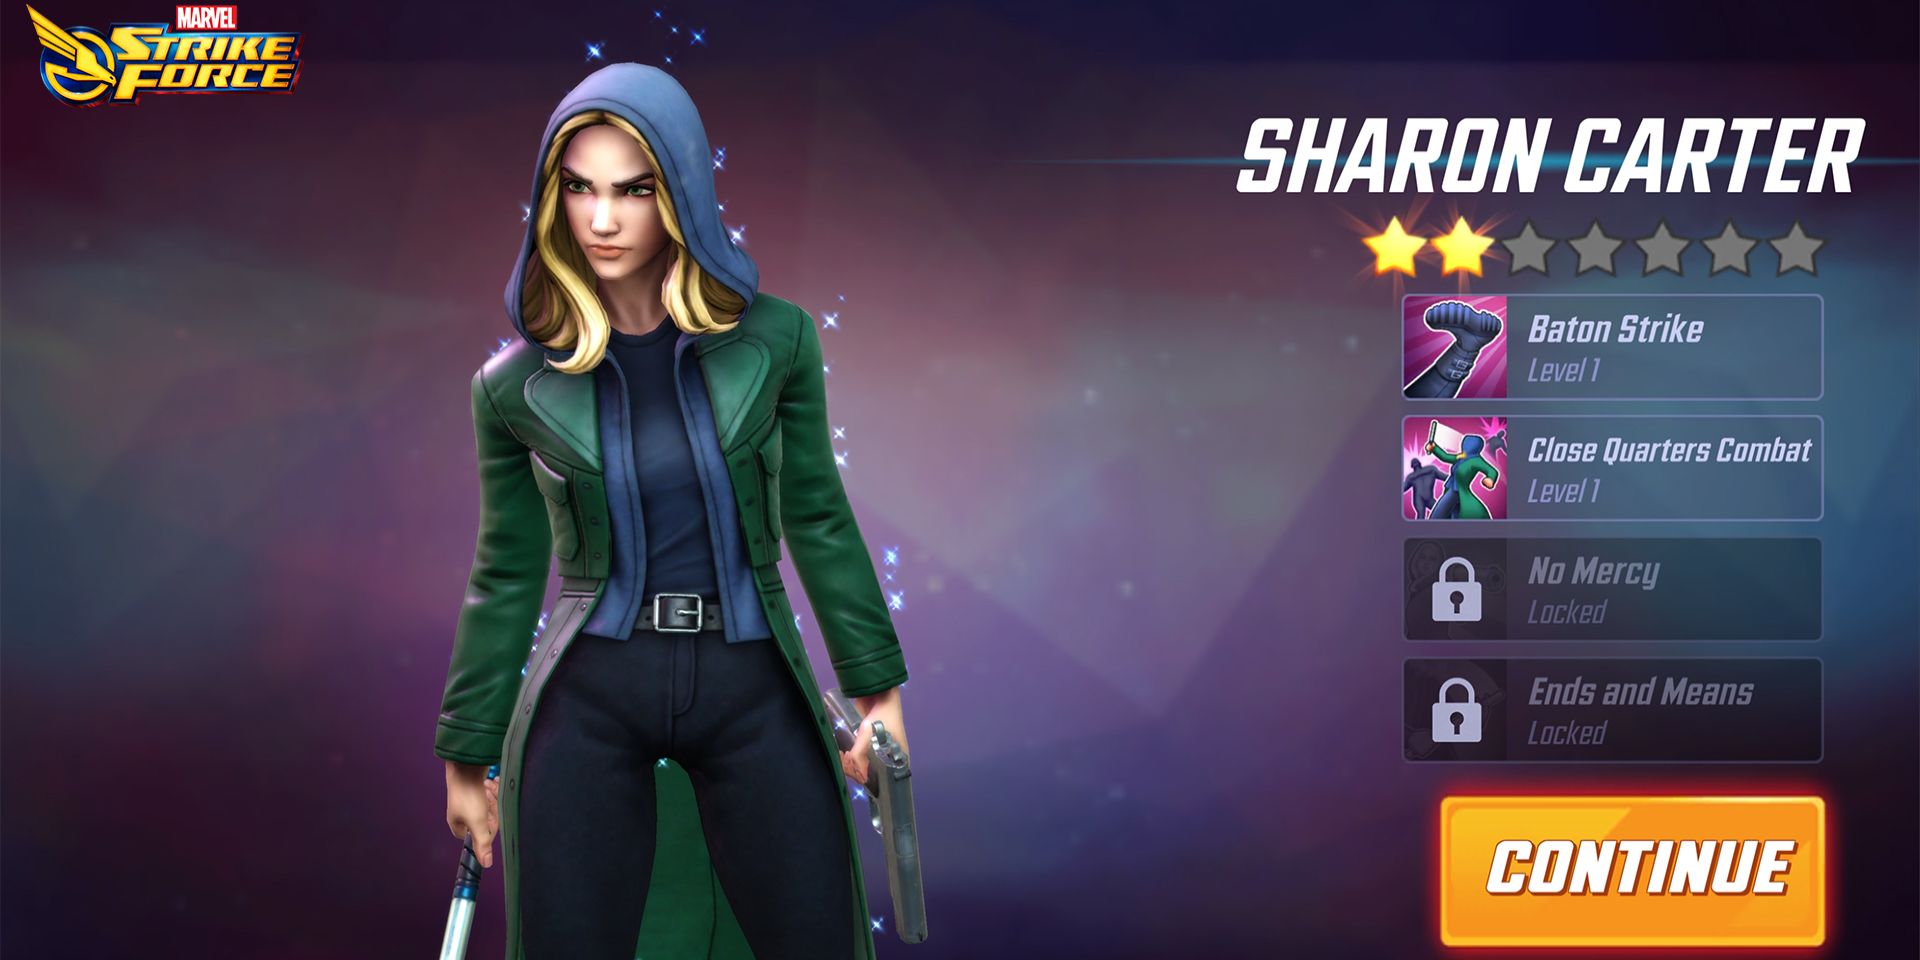 Character selection menu with Sharon carter holding guns in Marvel Strike Force.